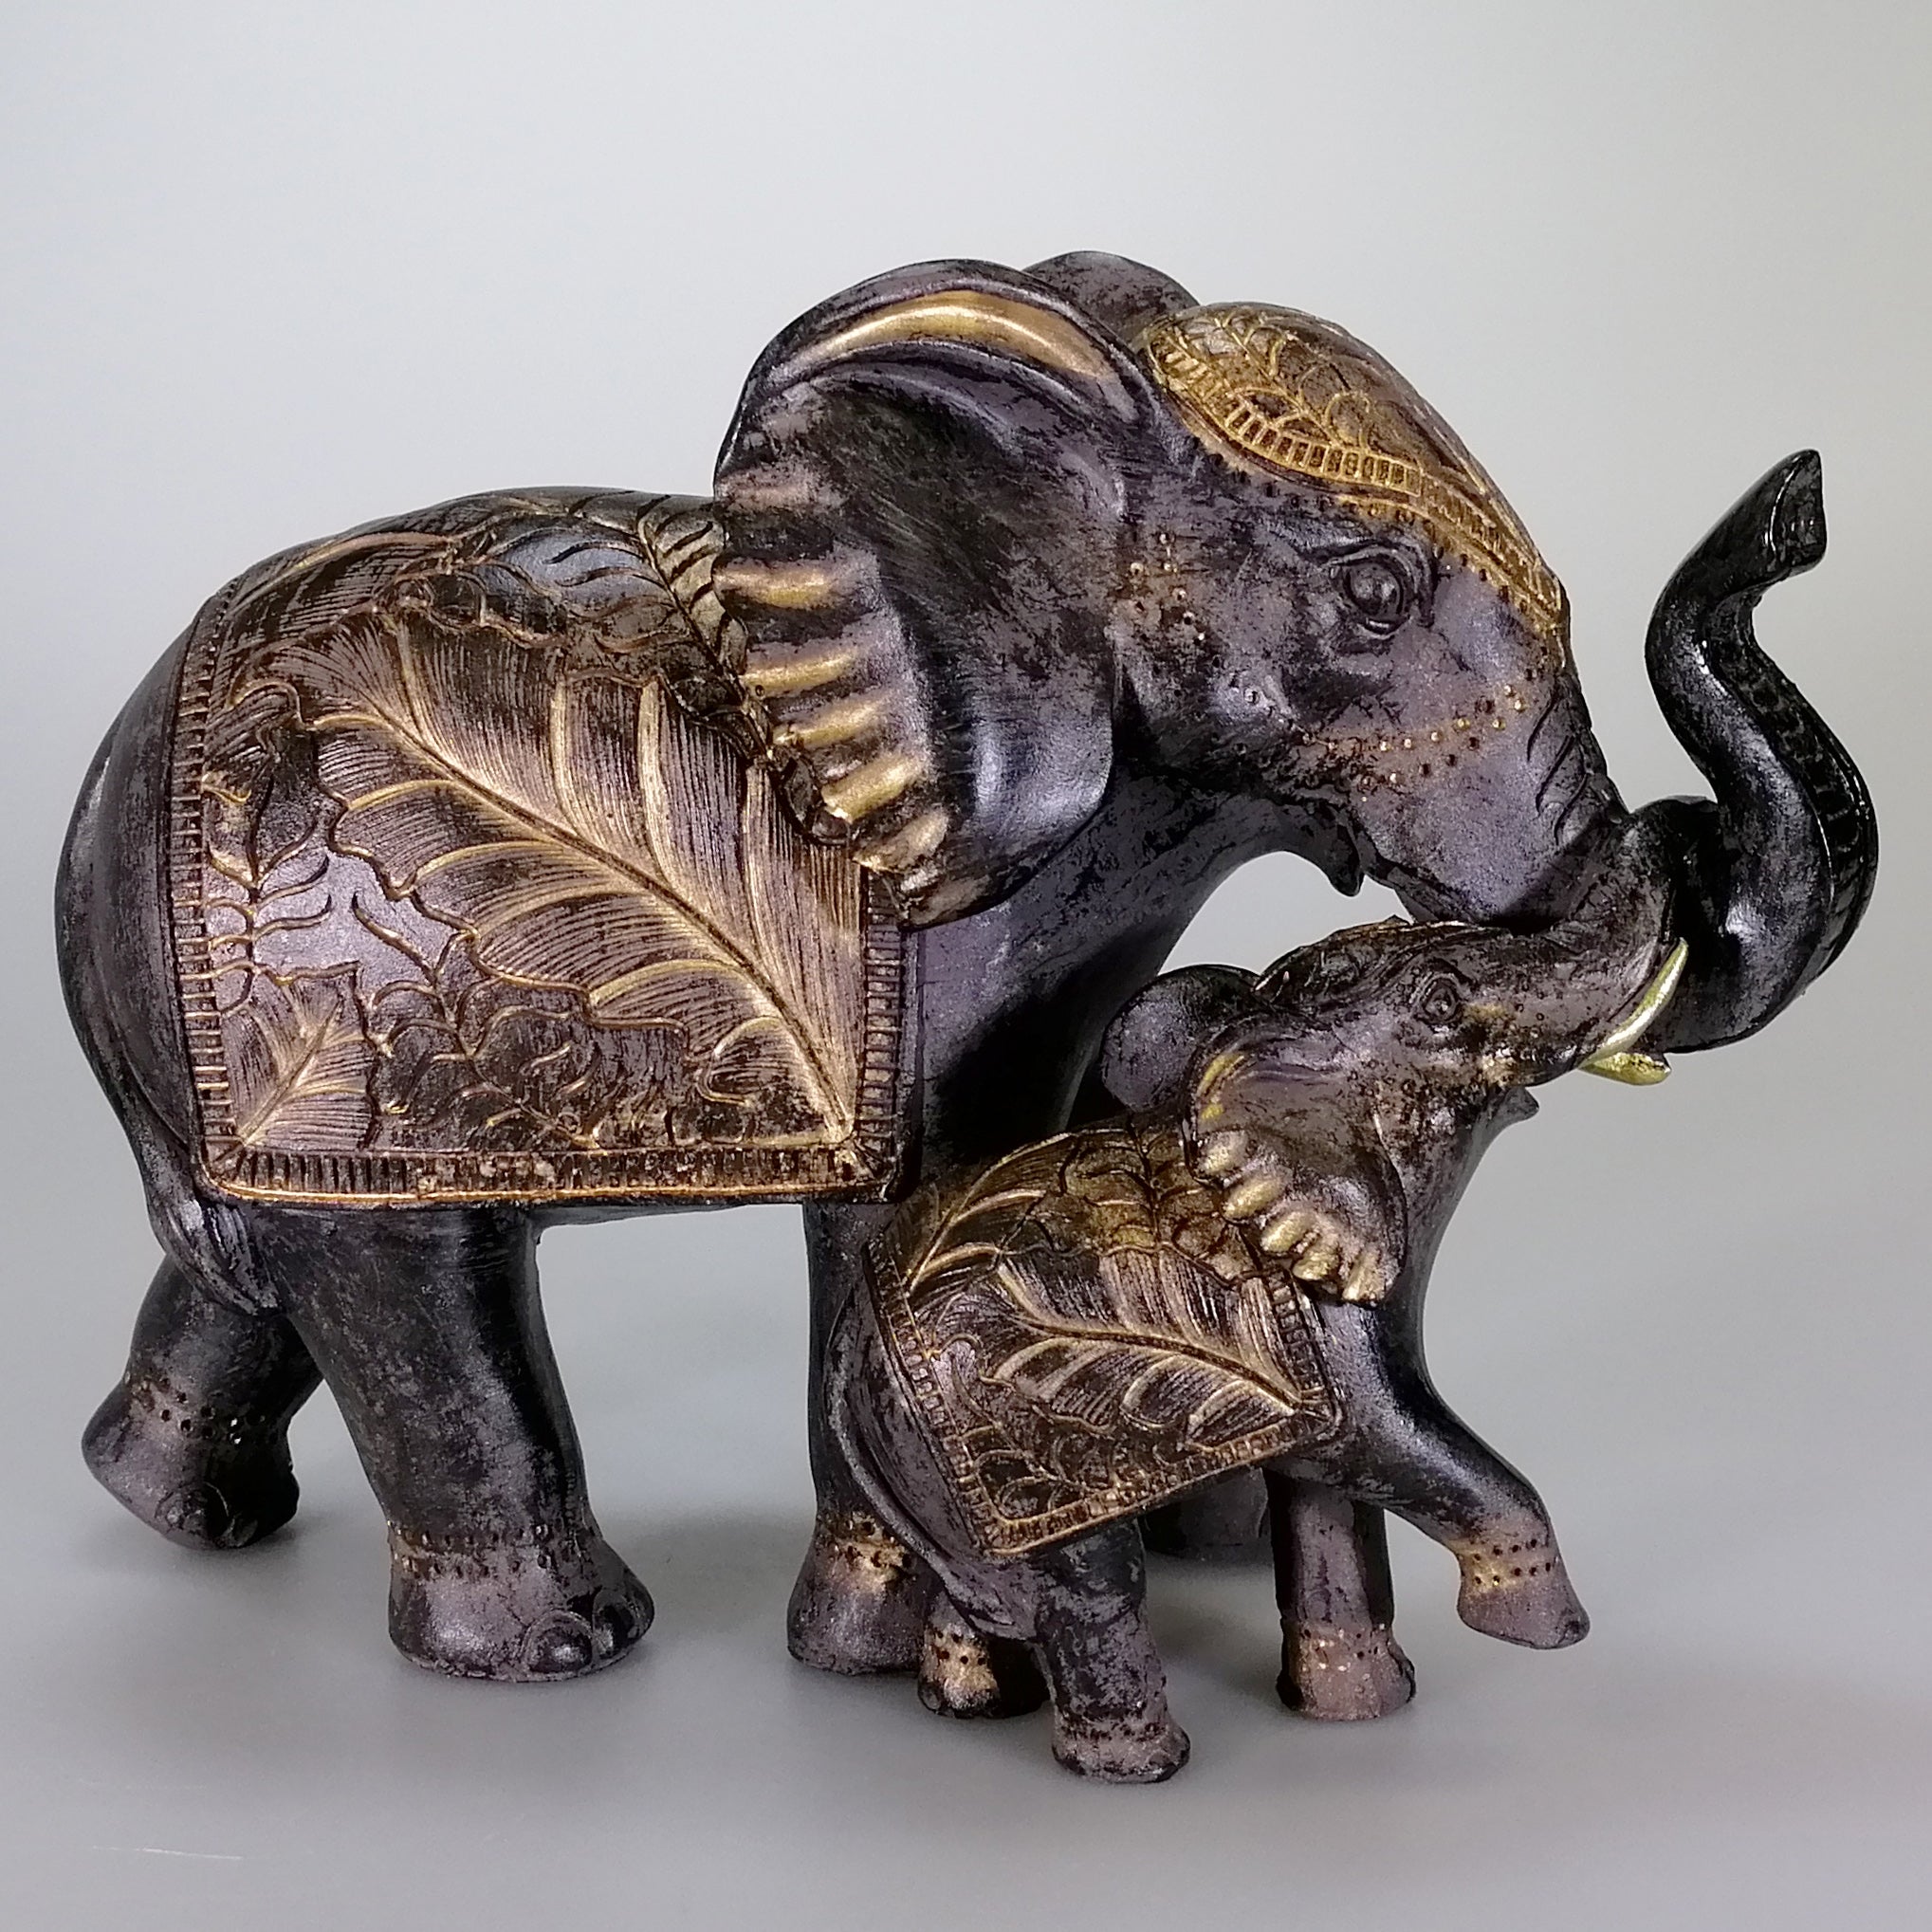 Resin Elephant Painted Black & Gold with Calf - 23cm